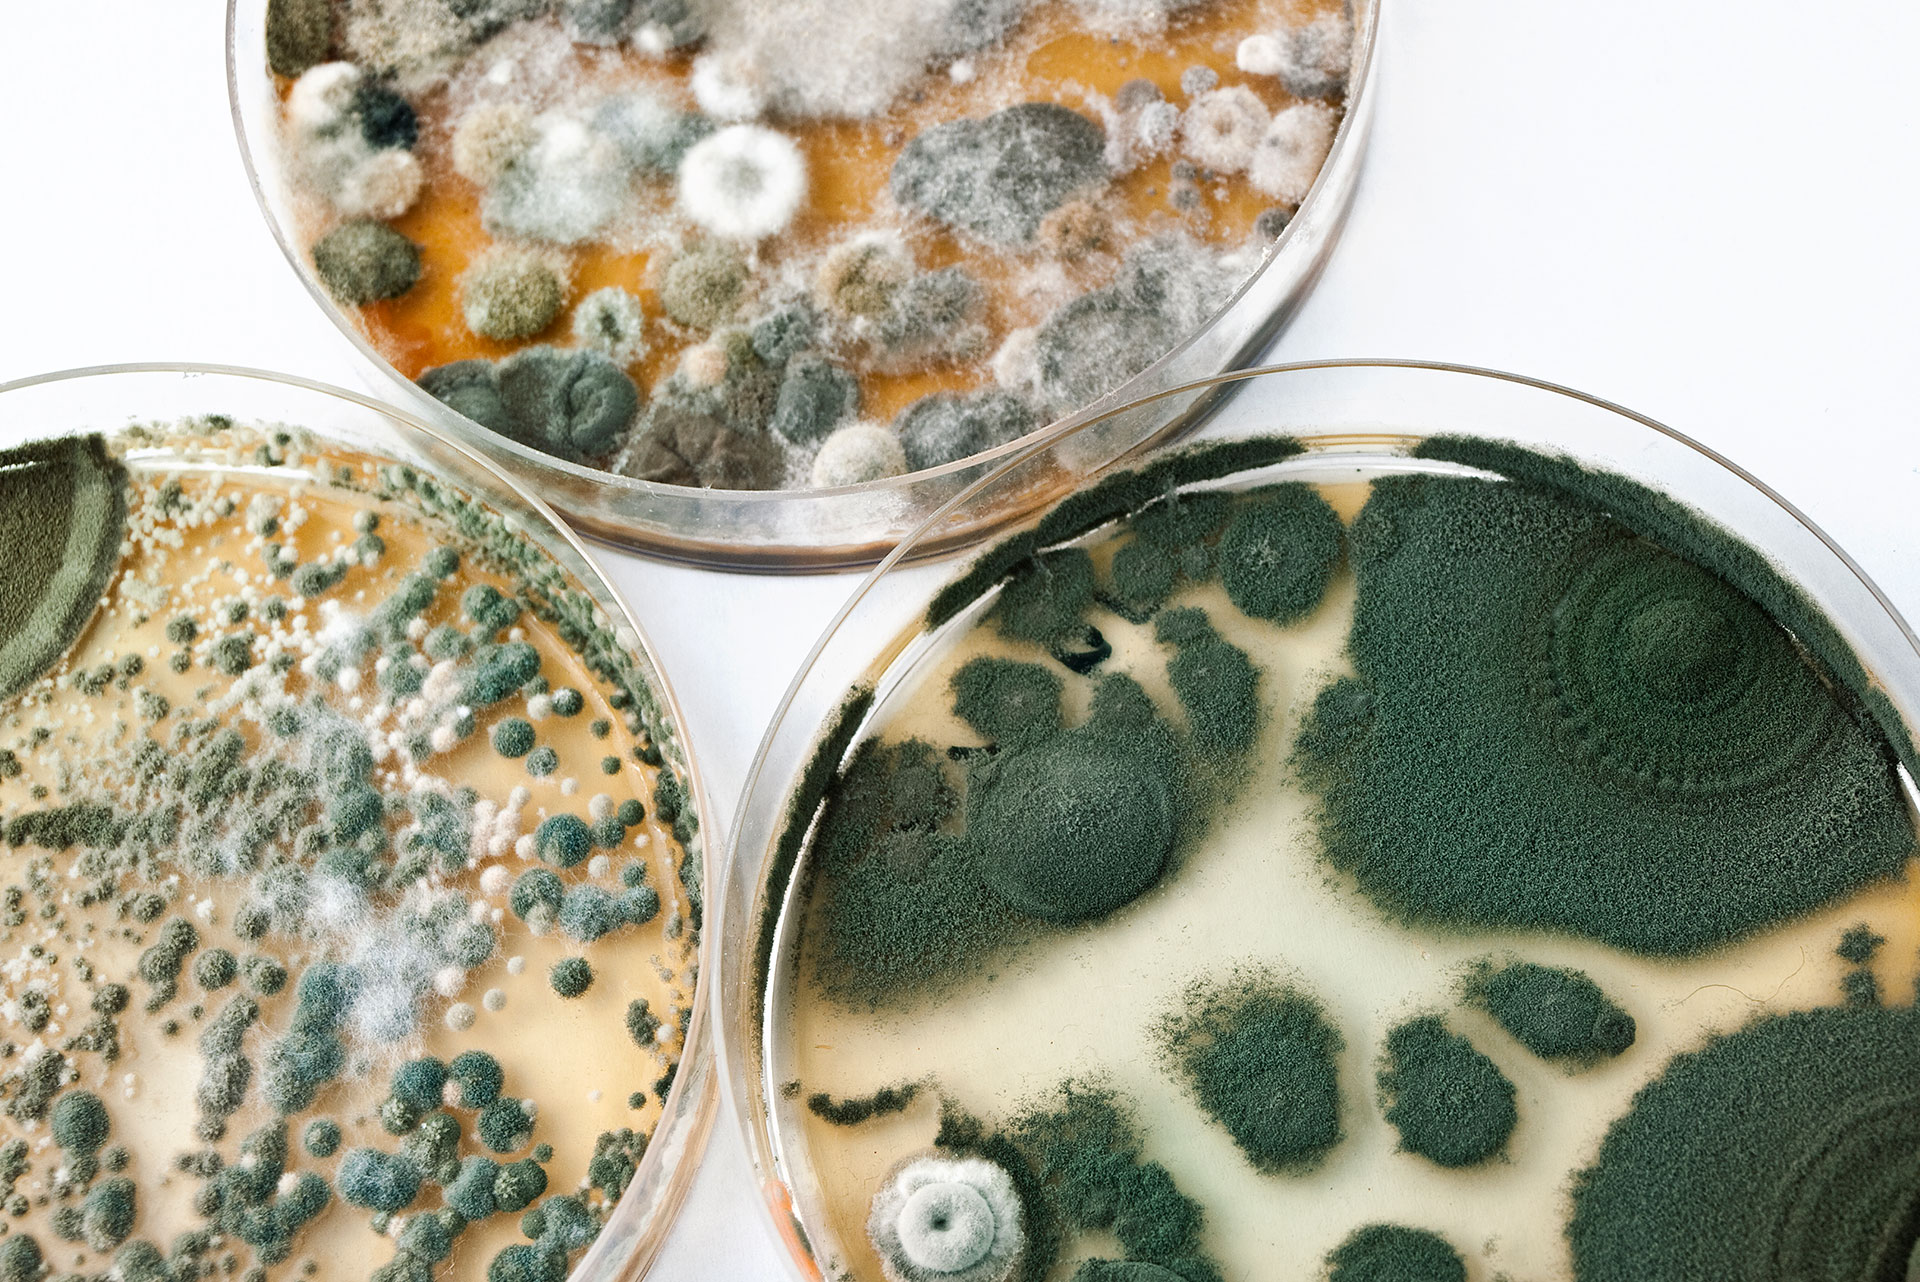 Mold growth in petri dishes